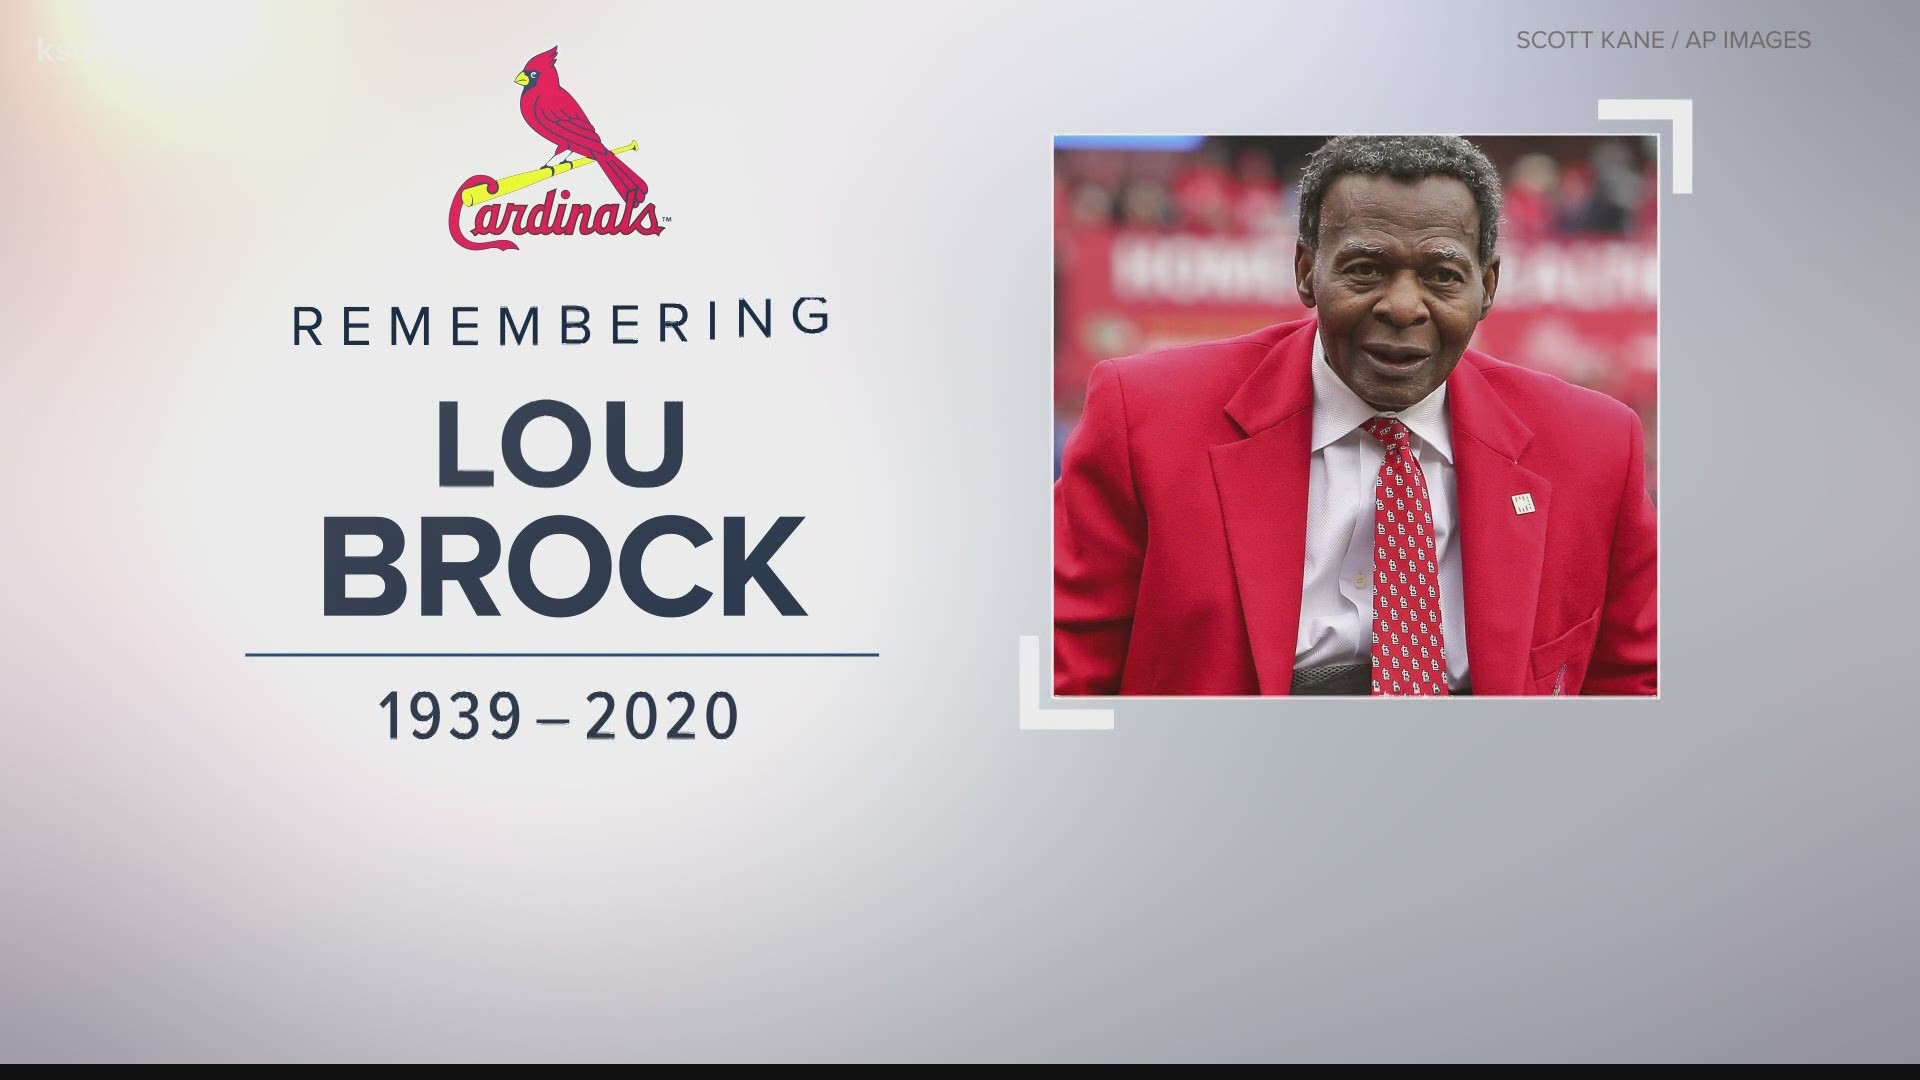 Mourners paid their respects to the Cardinals Hall of Famer on Friday